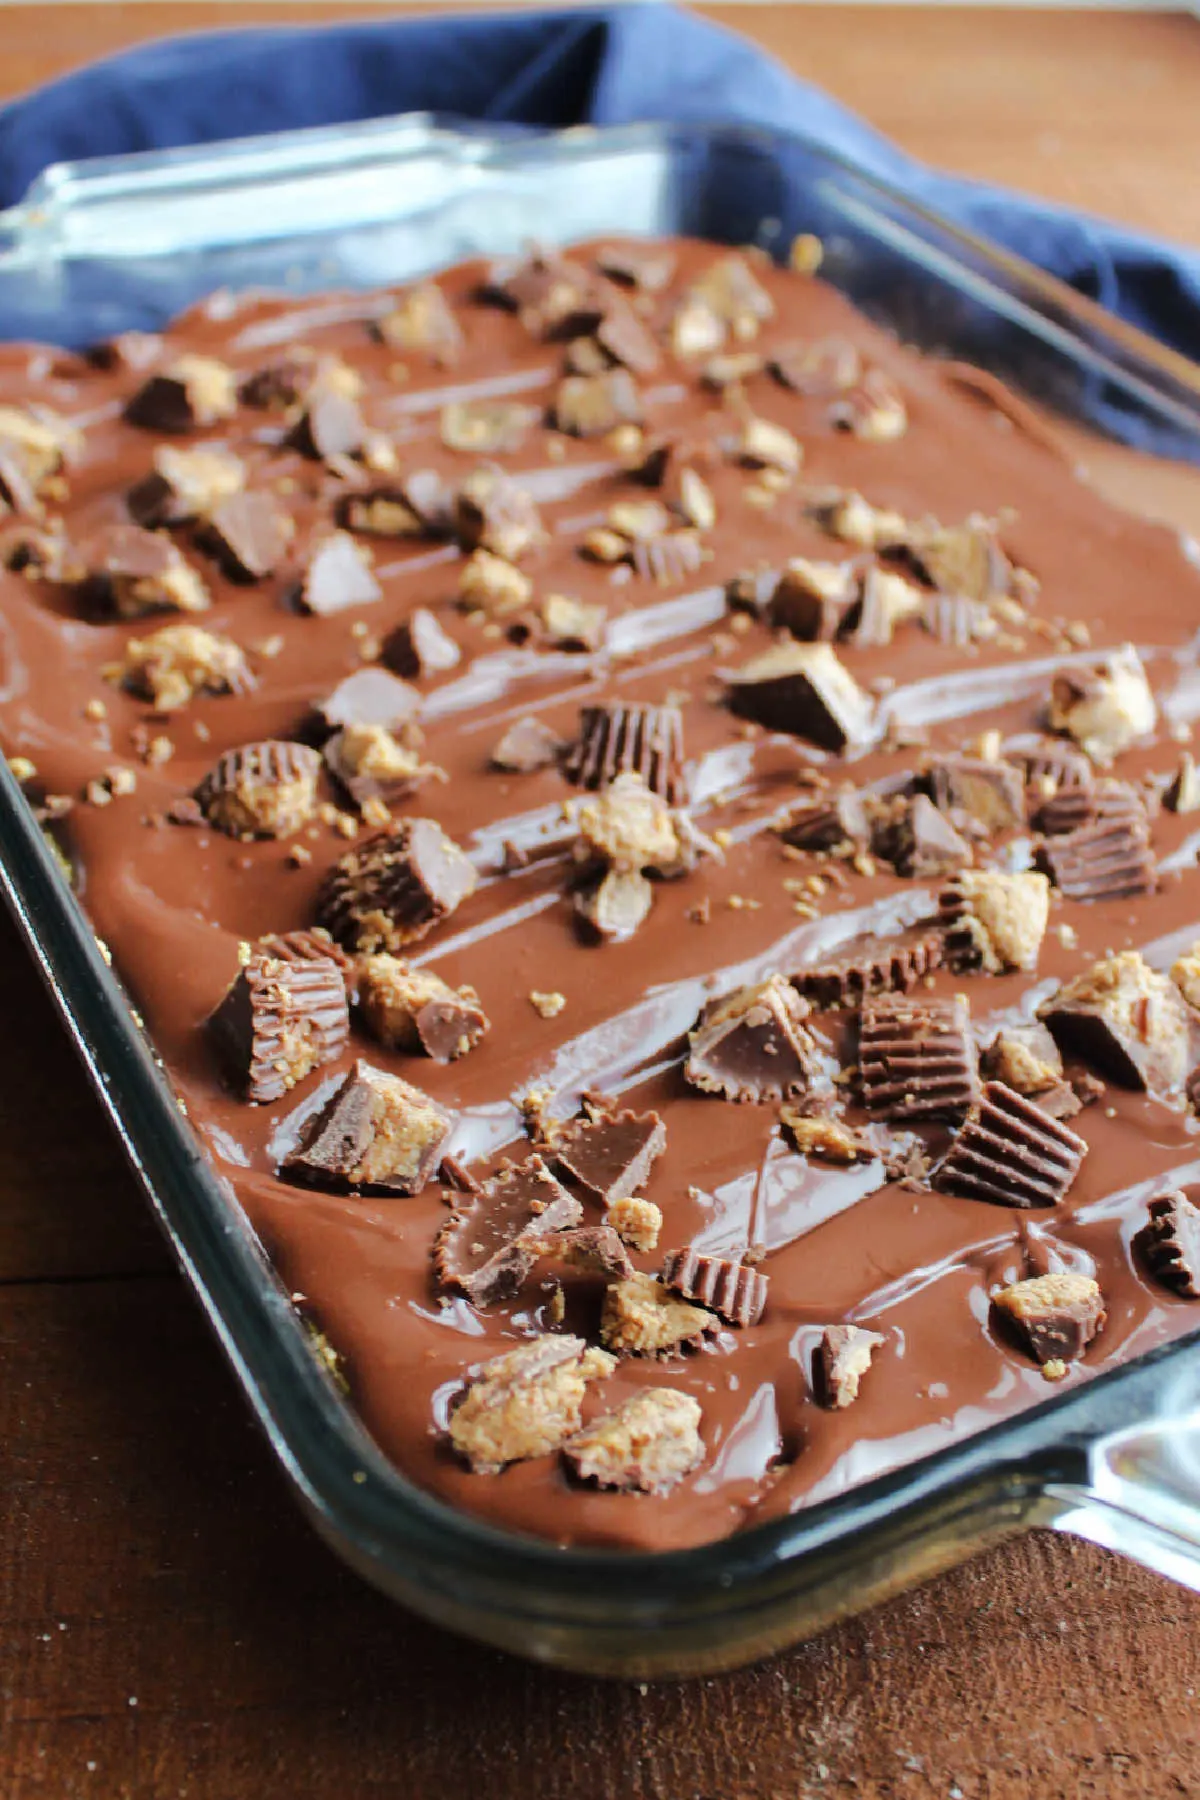 Finished pan of peanut butter bars topped with chocolate and chopped peanut butter cups.